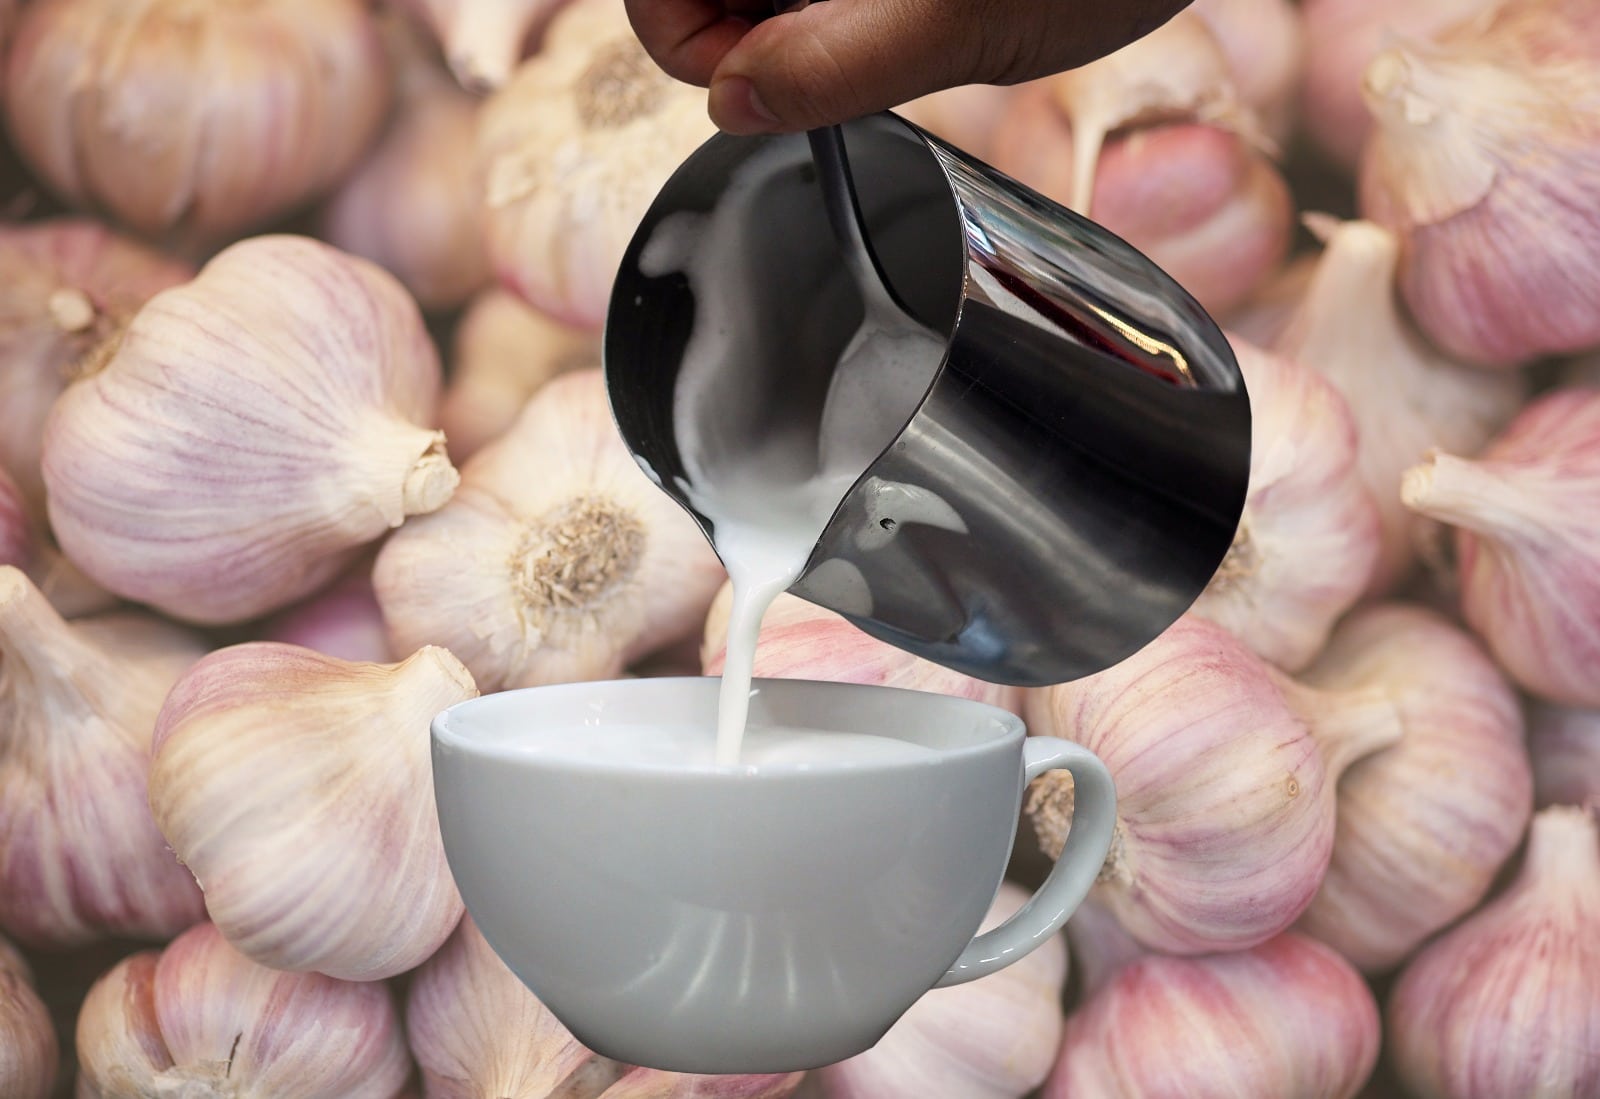 garlic milk" is a new trend that could make your back feel